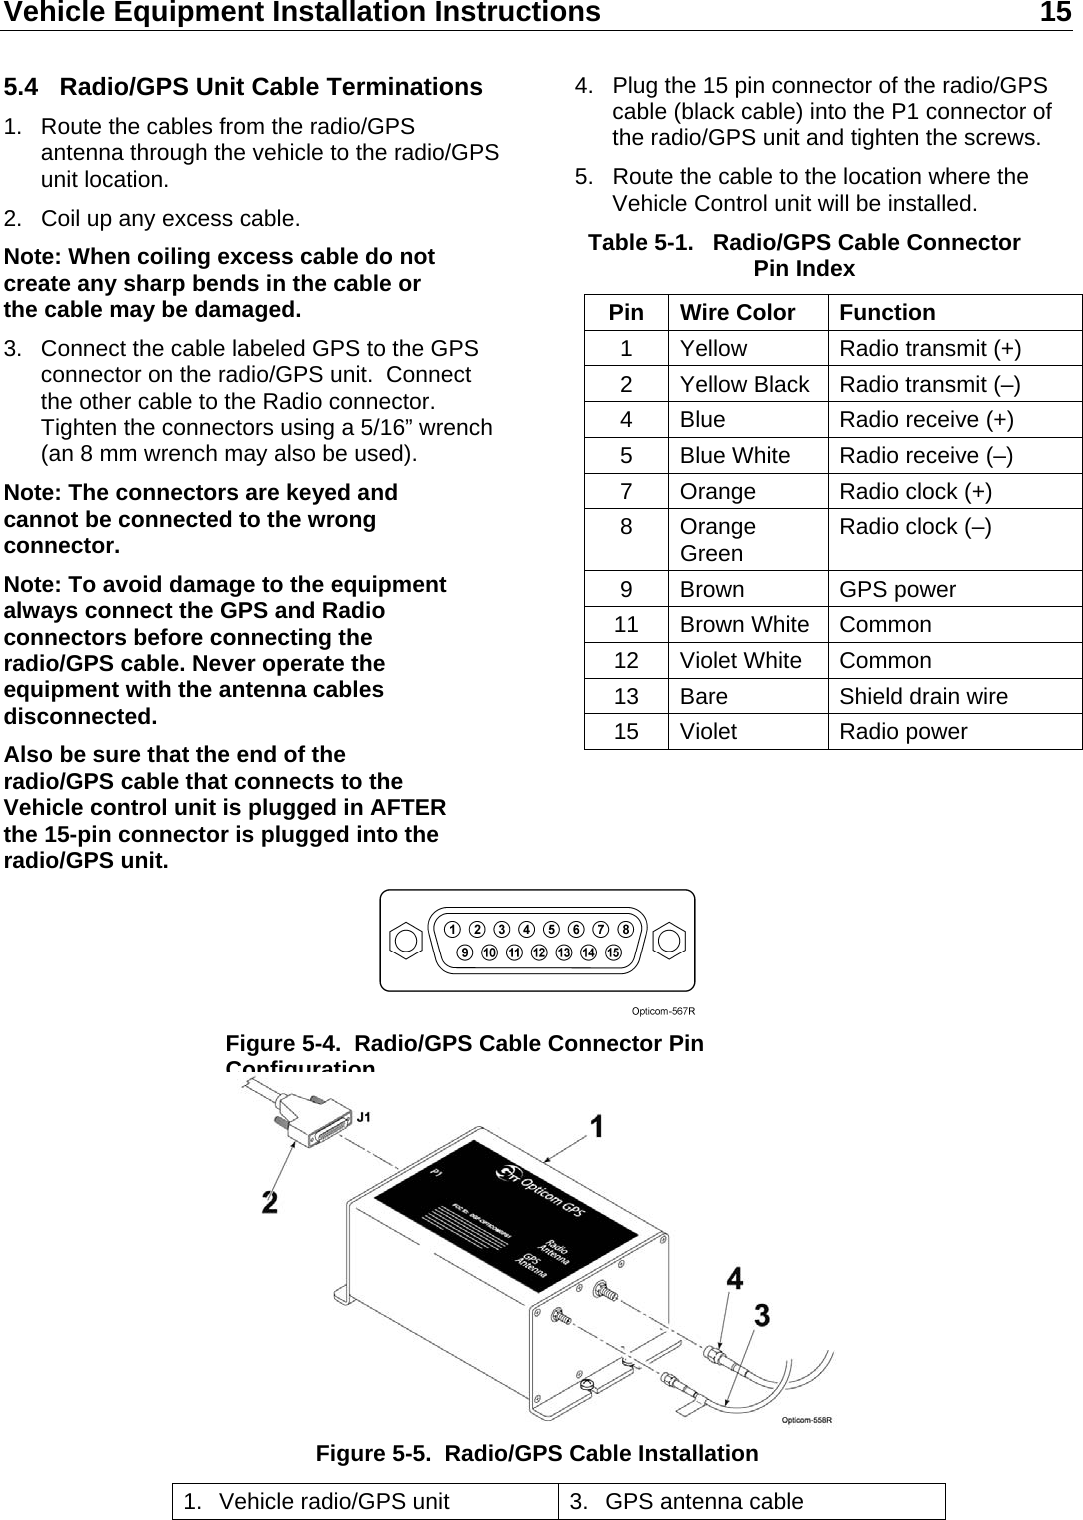 Vehicle Equipment Installation Instructions 15  5.4  Radio/GPS Unit Cable Terminations 1.  Route the cables from the radio/GPS antenna through the vehicle to the radio/GPS unit location. 2.  Coil up any excess cable.  Note: When coiling excess cable do not create any sharp bends in the cable or the cable may be damaged. 3.  Connect the cable labeled GPS to the GPS connector on the radio/GPS unit.  Connect the other cable to the Radio connector.  Tighten the connectors using a 5/16” wrench (an 8 mm wrench may also be used). Note: The connectors are keyed and cannot be connected to the wrong connector. Note: To avoid damage to the equipment always connect the GPS and Radio connectors before connecting the radio/GPS cable. Never operate the equipment with the antenna cables disconnected. Also be sure that the end of the radio/GPS cable that connects to the Vehicle control unit is plugged in AFTER the 15-pin connector is plugged into the radio/GPS unit. 4.  Plug the 15 pin connector of the radio/GPS cable (black cable) into the P1 connector of the radio/GPS unit and tighten the screws. 5.  Route the cable to the location where the Vehicle Control unit will be installed. Table 5-1.   Radio/GPS Cable Connector Pin Index Pin Wire Color  Function 1  Yellow  Radio transmit (+) 2  Yellow Black   Radio transmit (–) 4  Blue   Radio receive (+) 5  Blue White  Radio receive (–) 7  Orange   Radio clock (+) 8 Orange Green  Radio clock (–) 9 Brown   GPS power 11 Brown White Common 12  Violet White   Common 13 Bare  Shield drain wire 15 Violet  Radio power     Figure 5-5.  Radio/GPS Cable Installation 1.  Vehicle radio/GPS unit  3.  GPS antenna cable Figure 5-4.  Radio/GPS Cable Connector Pin Configuration